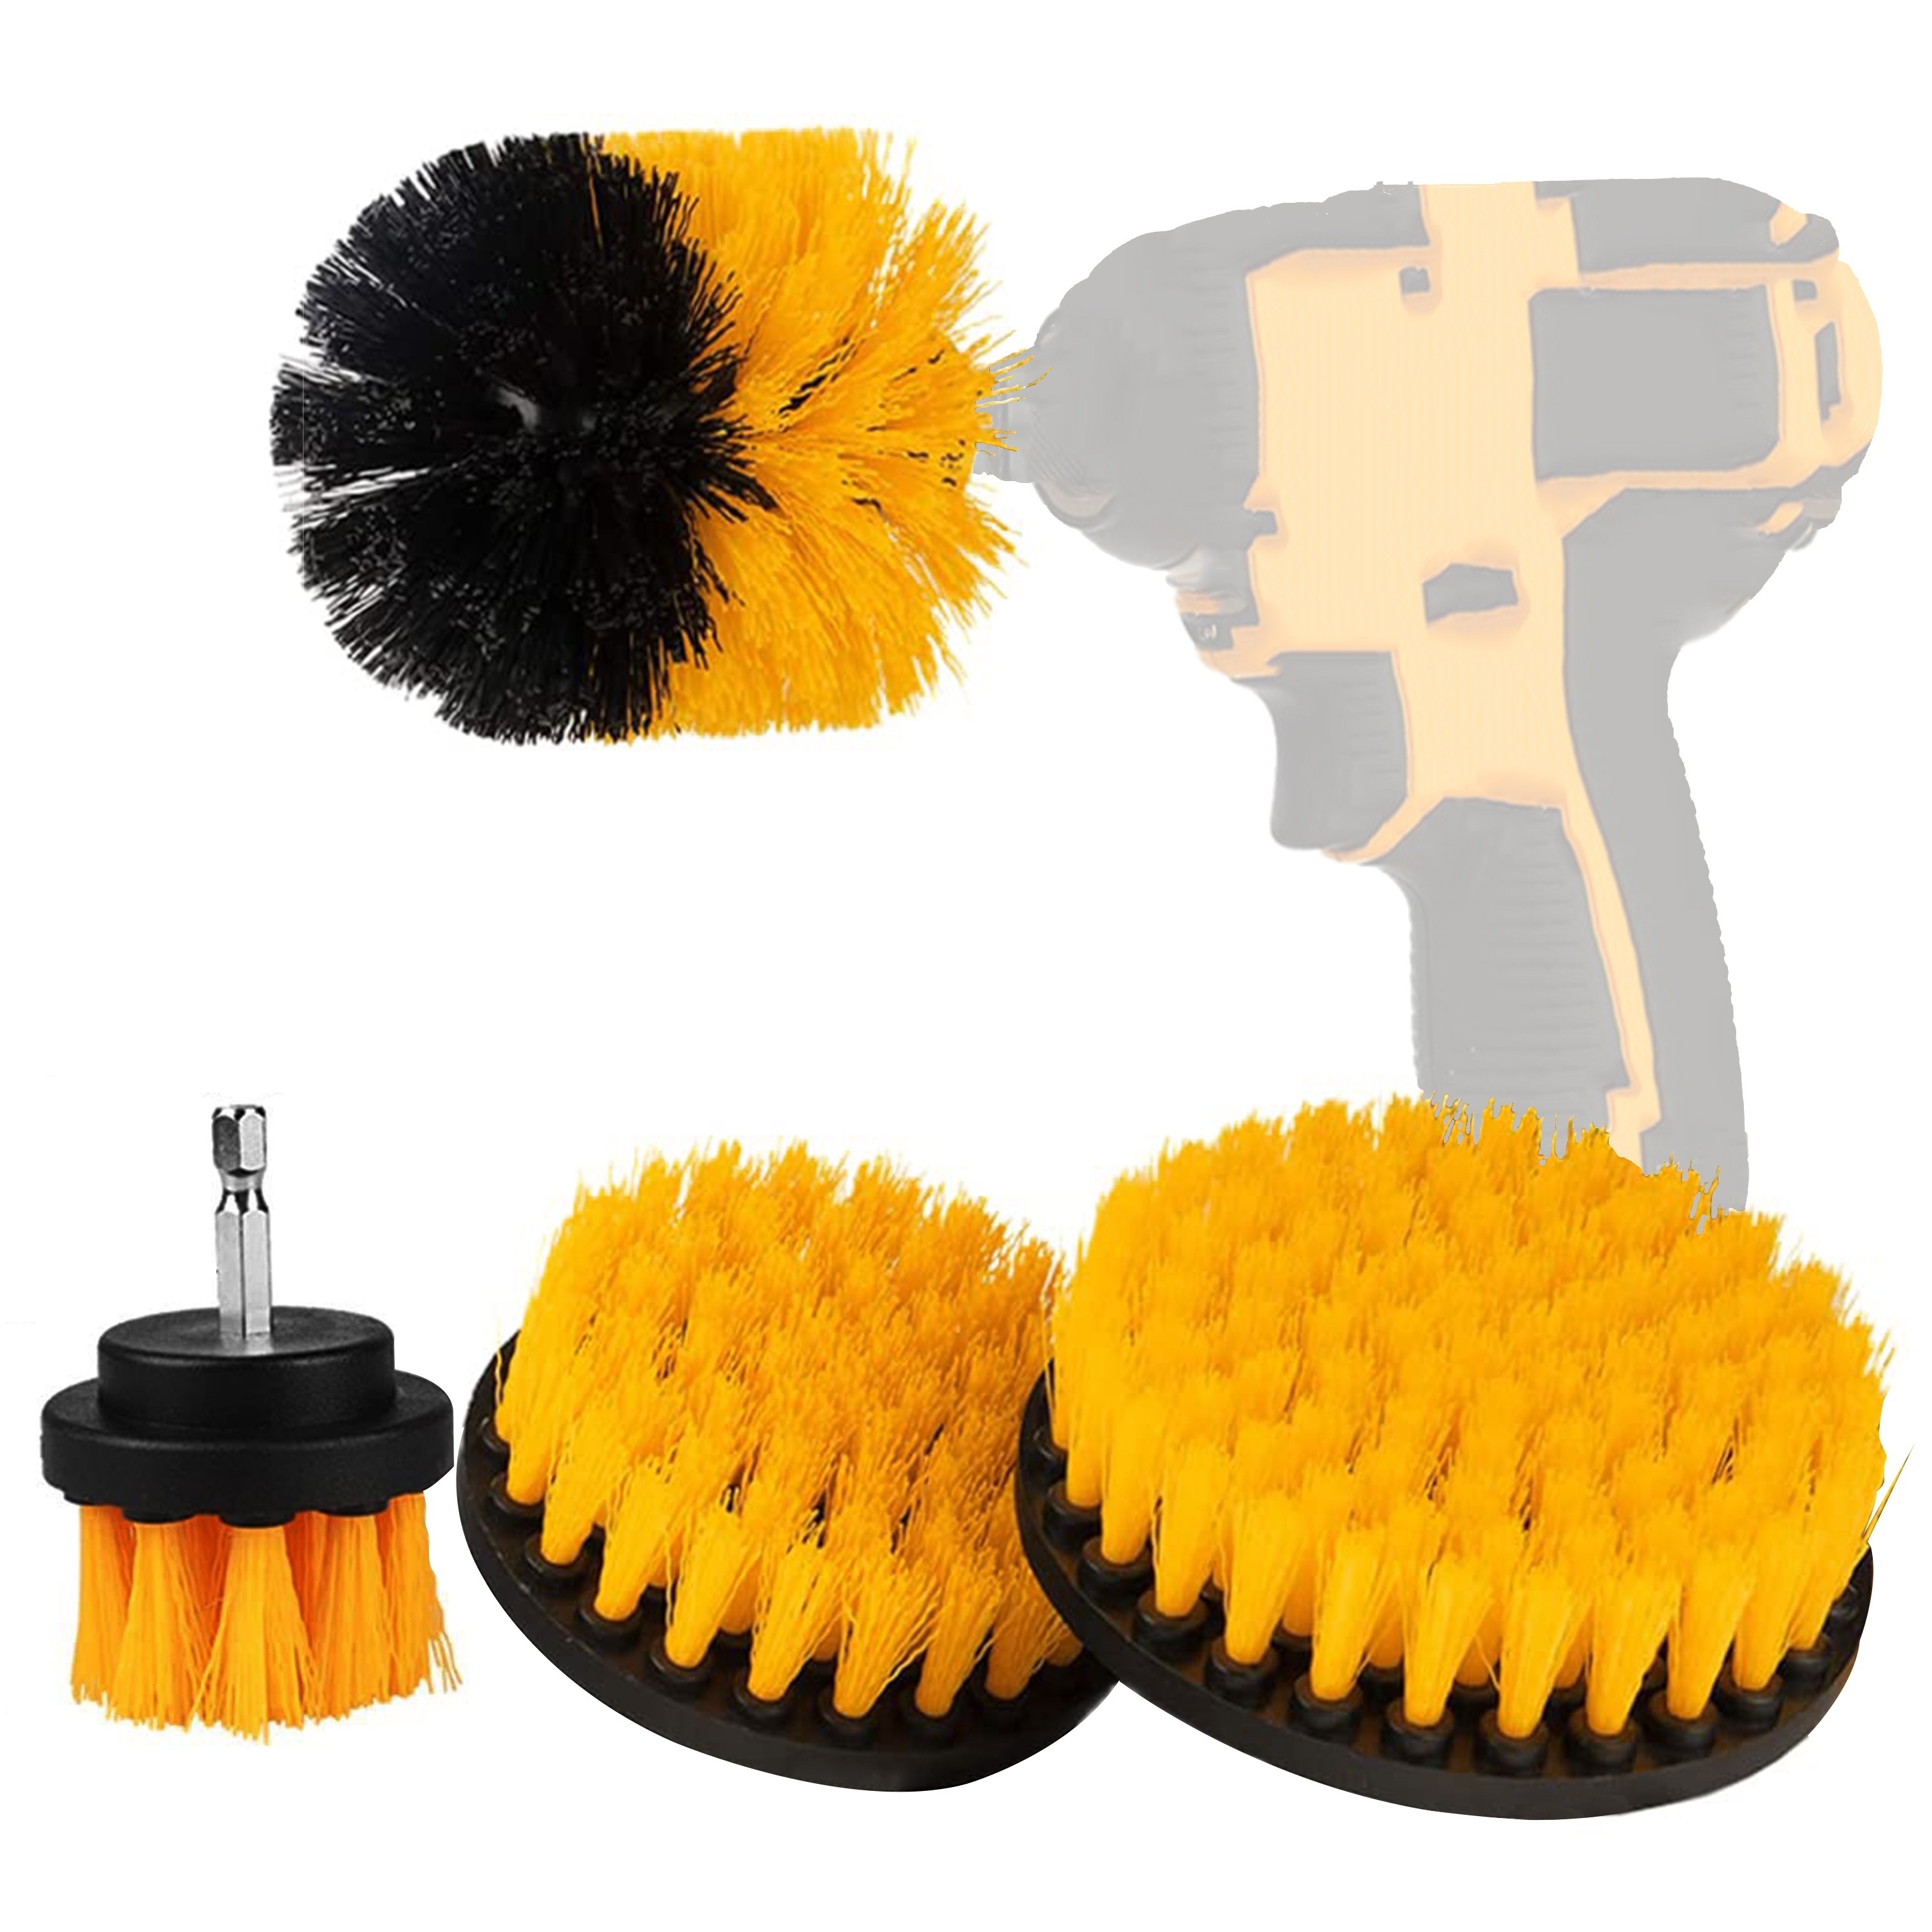 YIHATA 28PCS Drill Brush Cleaning Brushes Set, Power Scrubber Drill Brush  Set with Extend Long Attachment for Cleaning, Great for